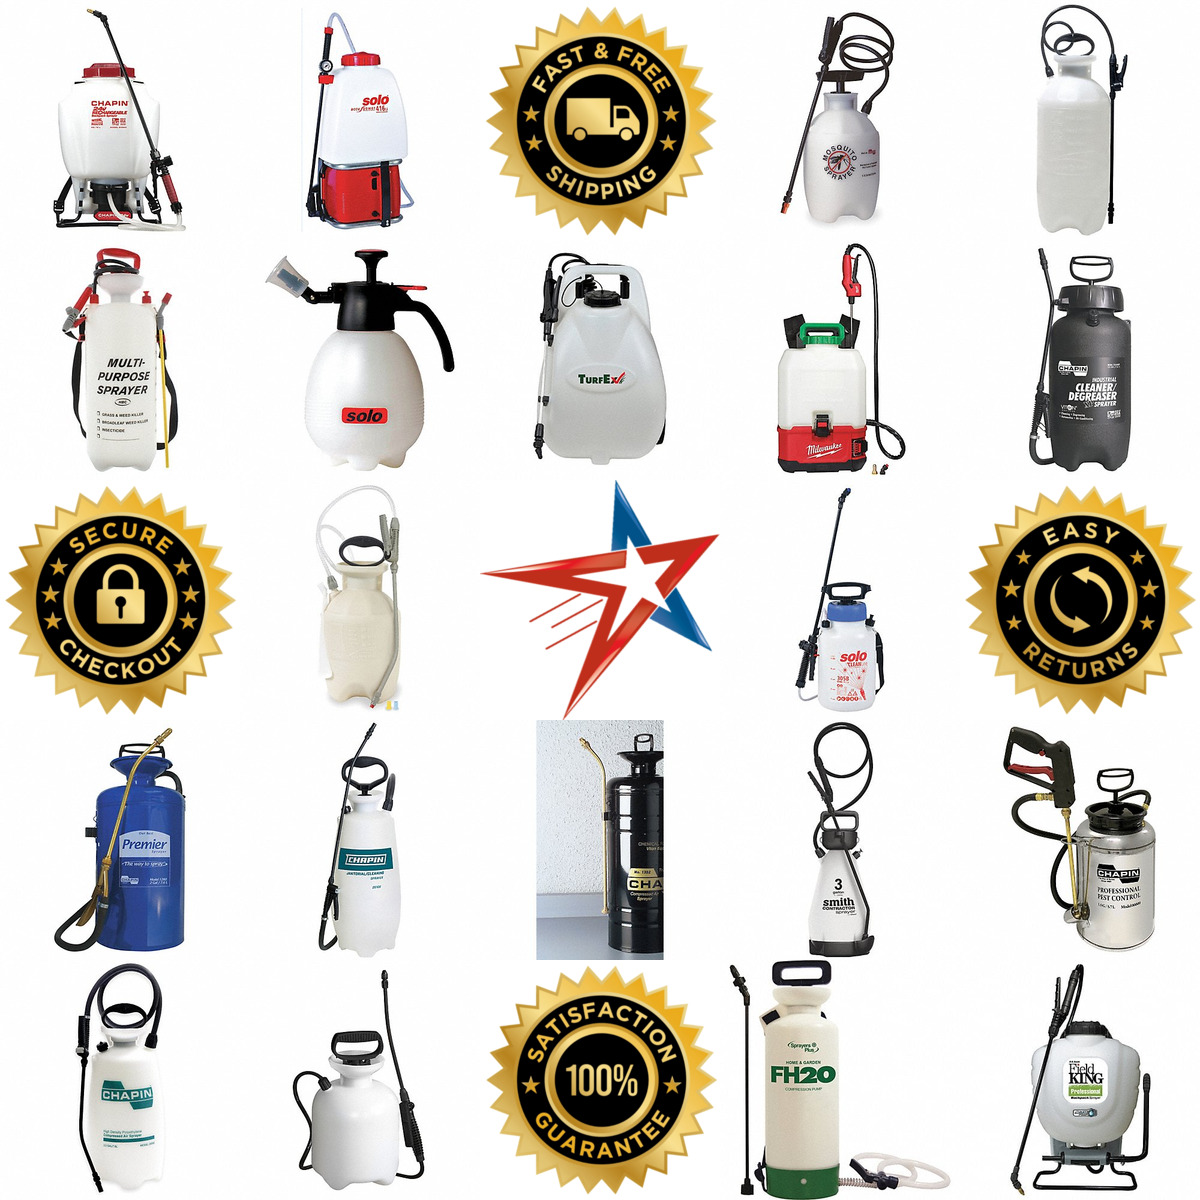 A selection of Compressed Air Sprayers products on GoVets